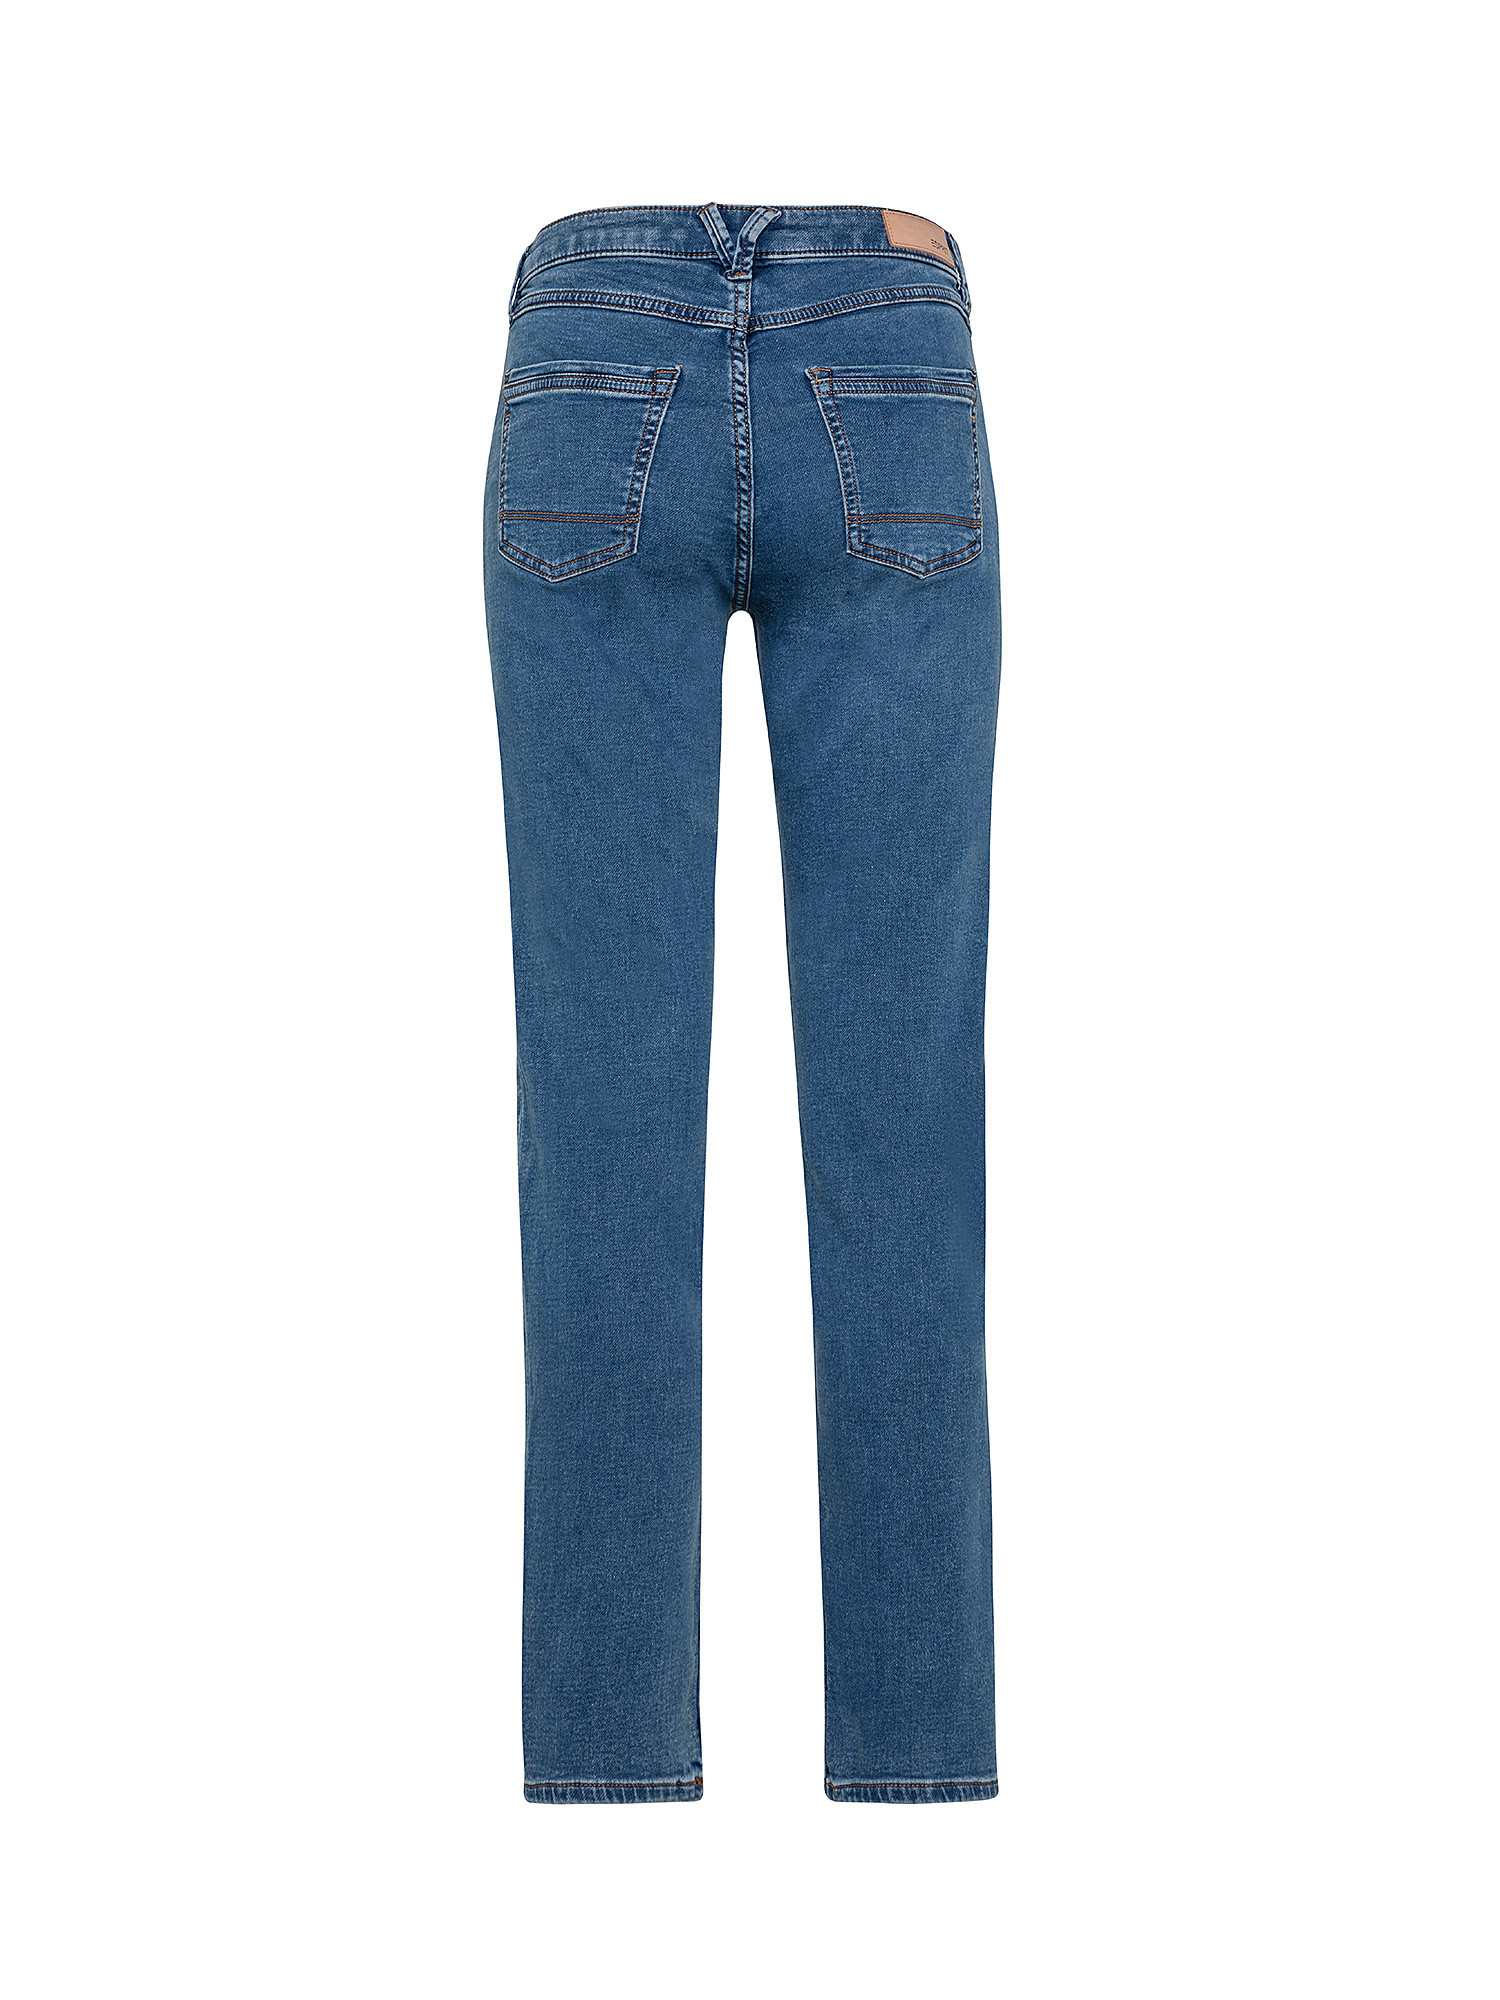 Jeans stretch in misto cotone biologico, Blu, large image number 1